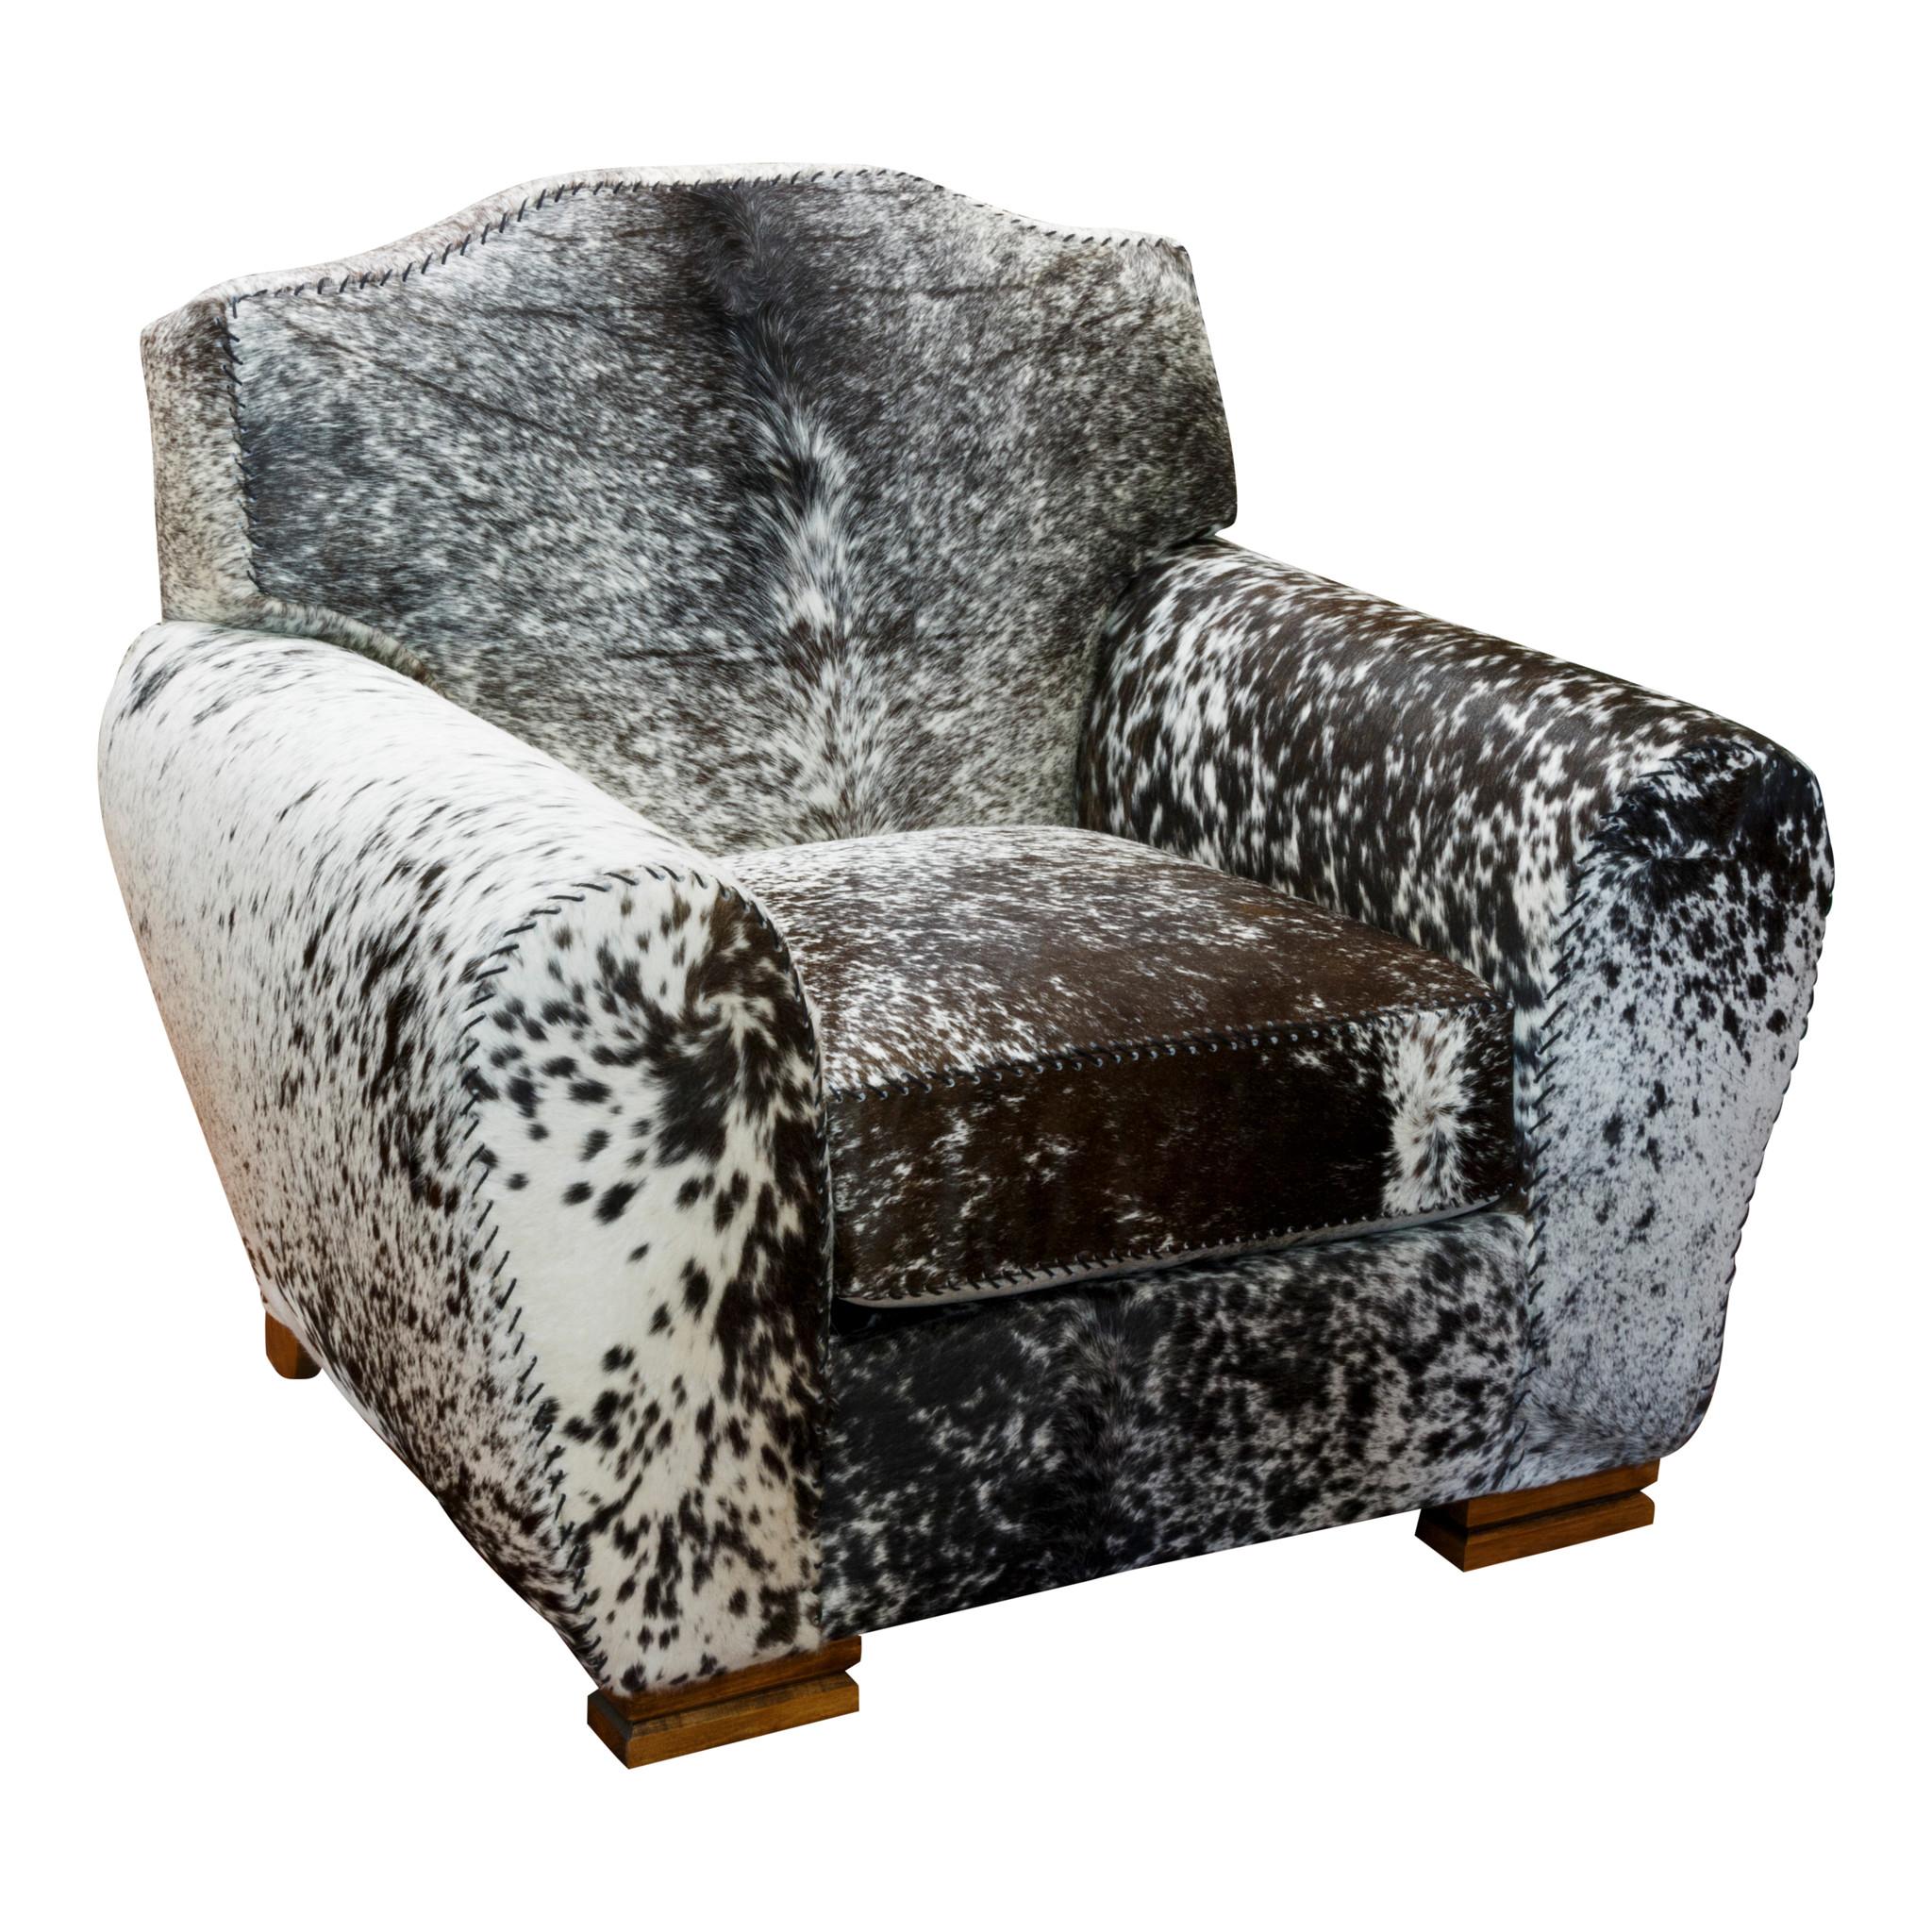 Kennedy collection black speckled great room chair with brown spot on back, of long-Horn hide with matching ottoman, seams buck stitched. Can choose customizable designs with leathers, wood and hides. Made to order so please allow time for